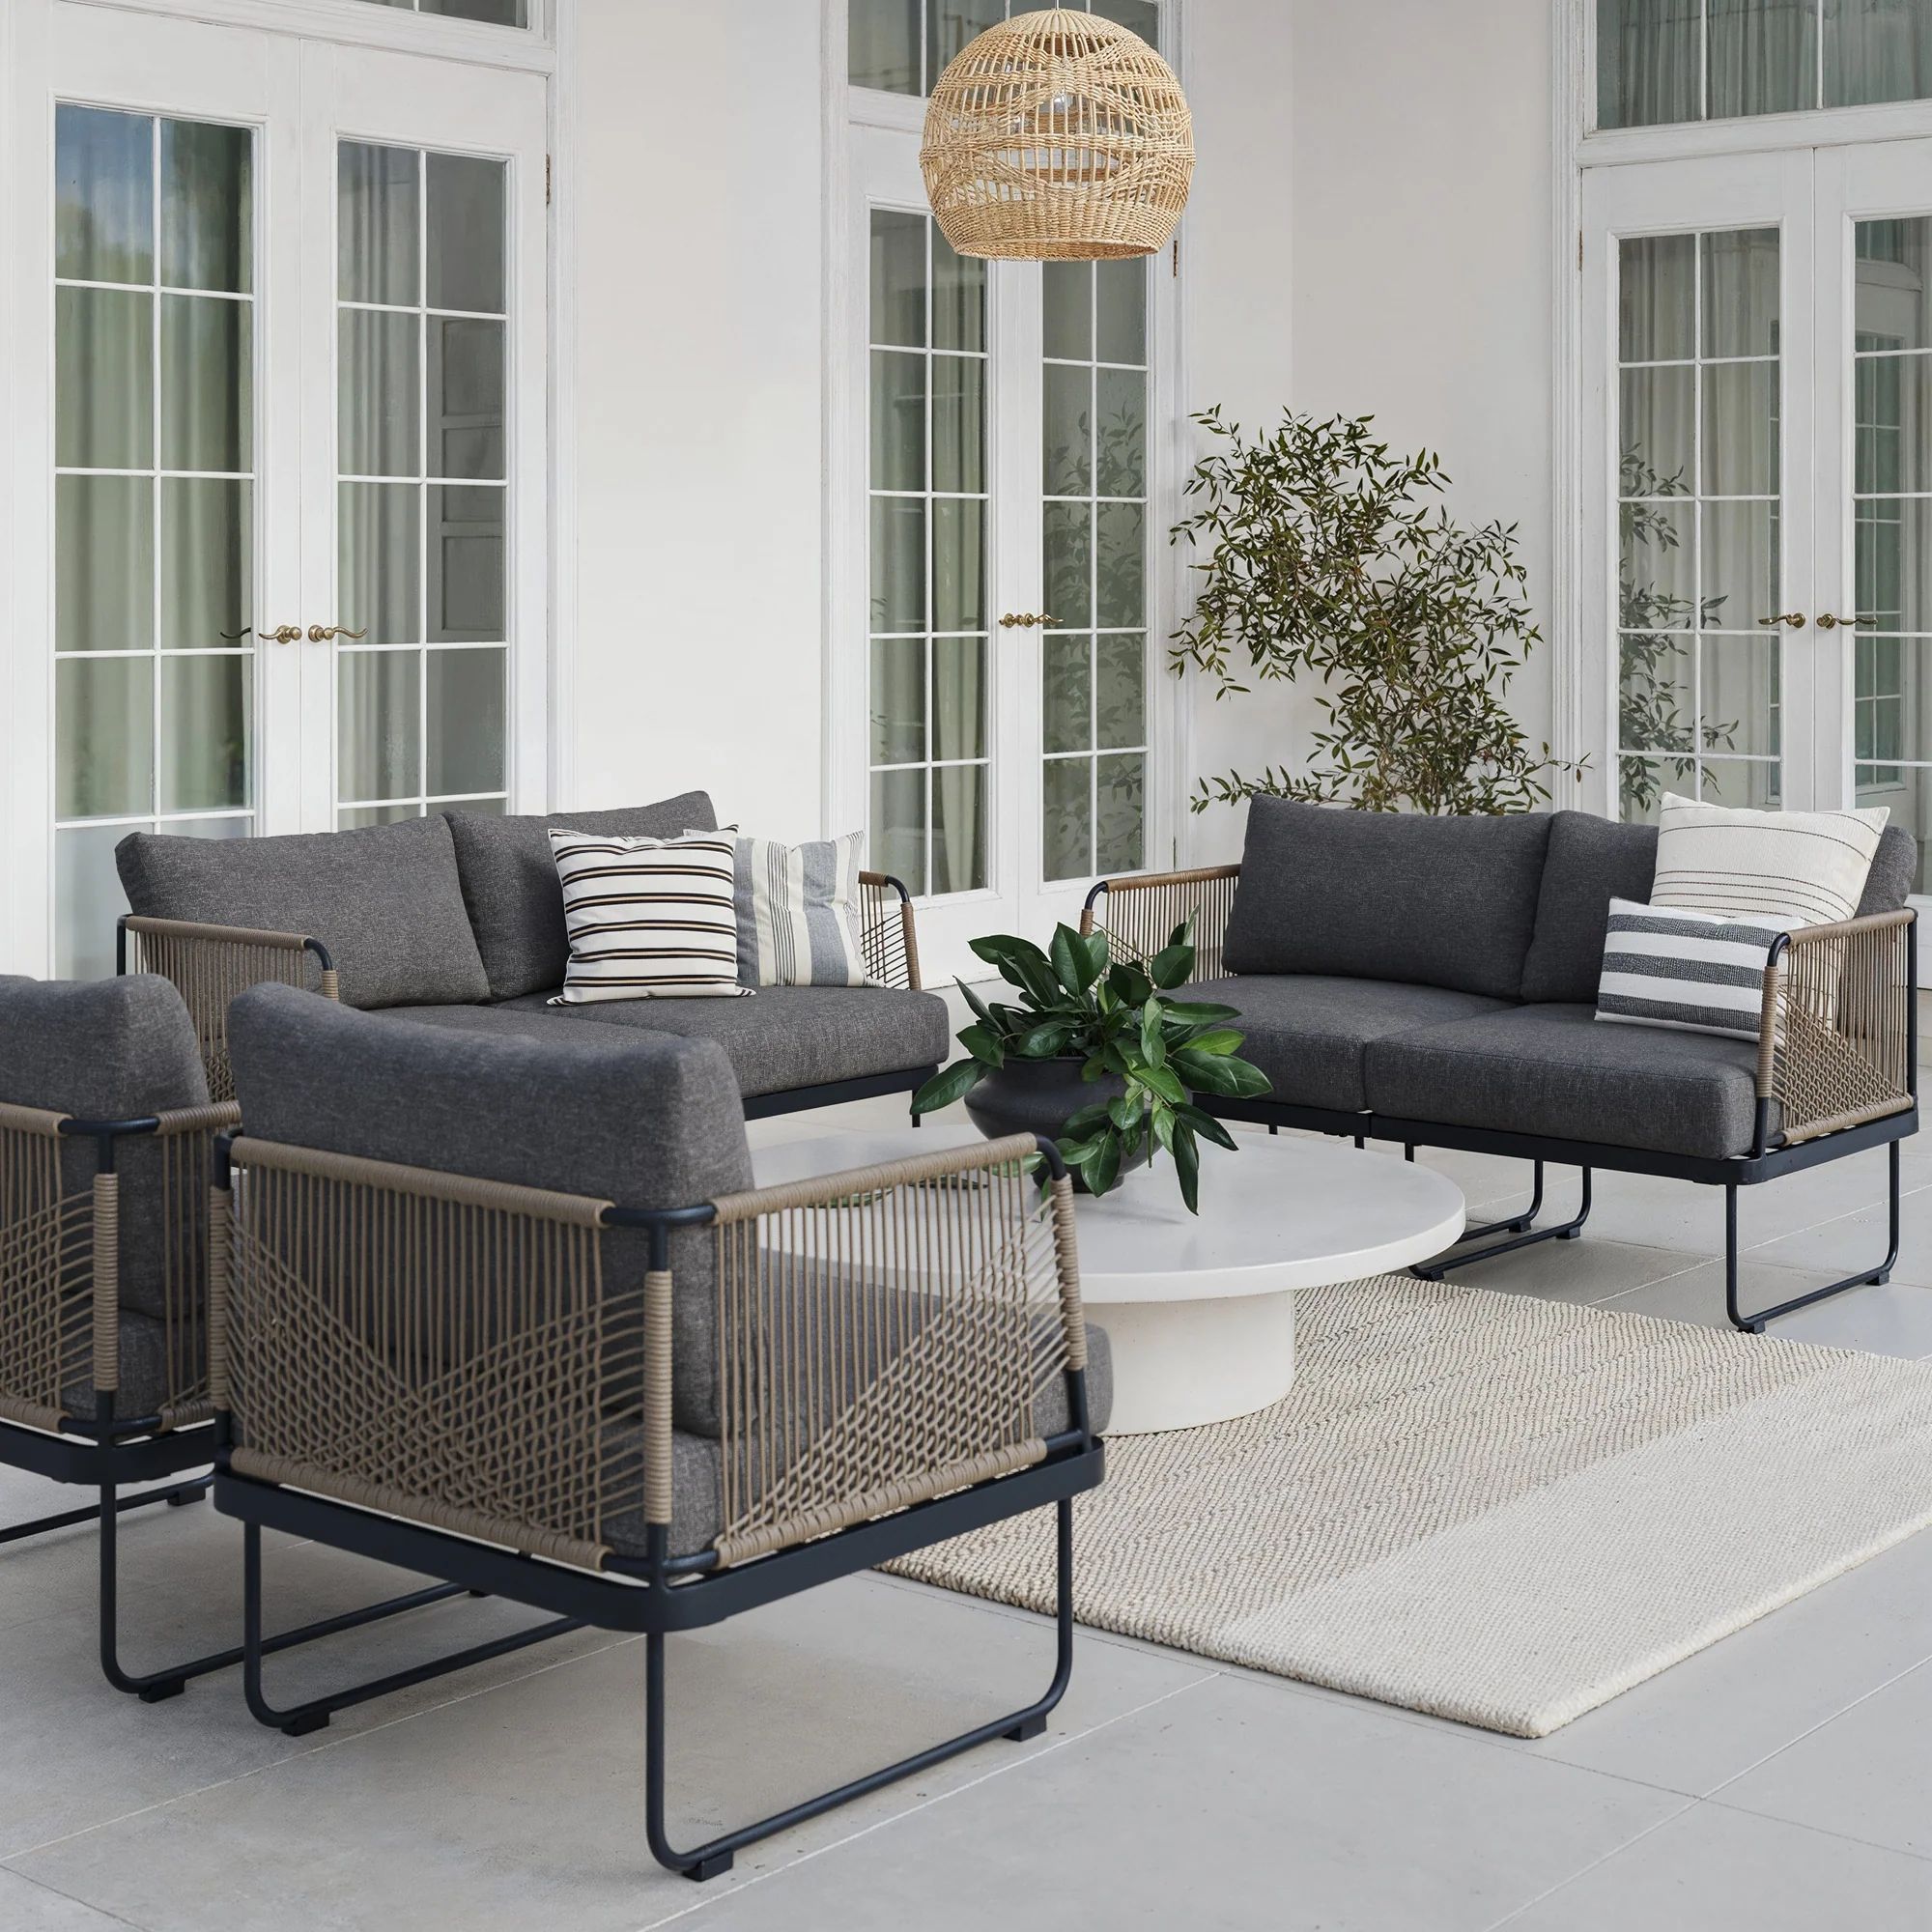 Outdoor Set of 2 Cord Patio Loveseats & 2 Arm Chairs Gray | Nathan James